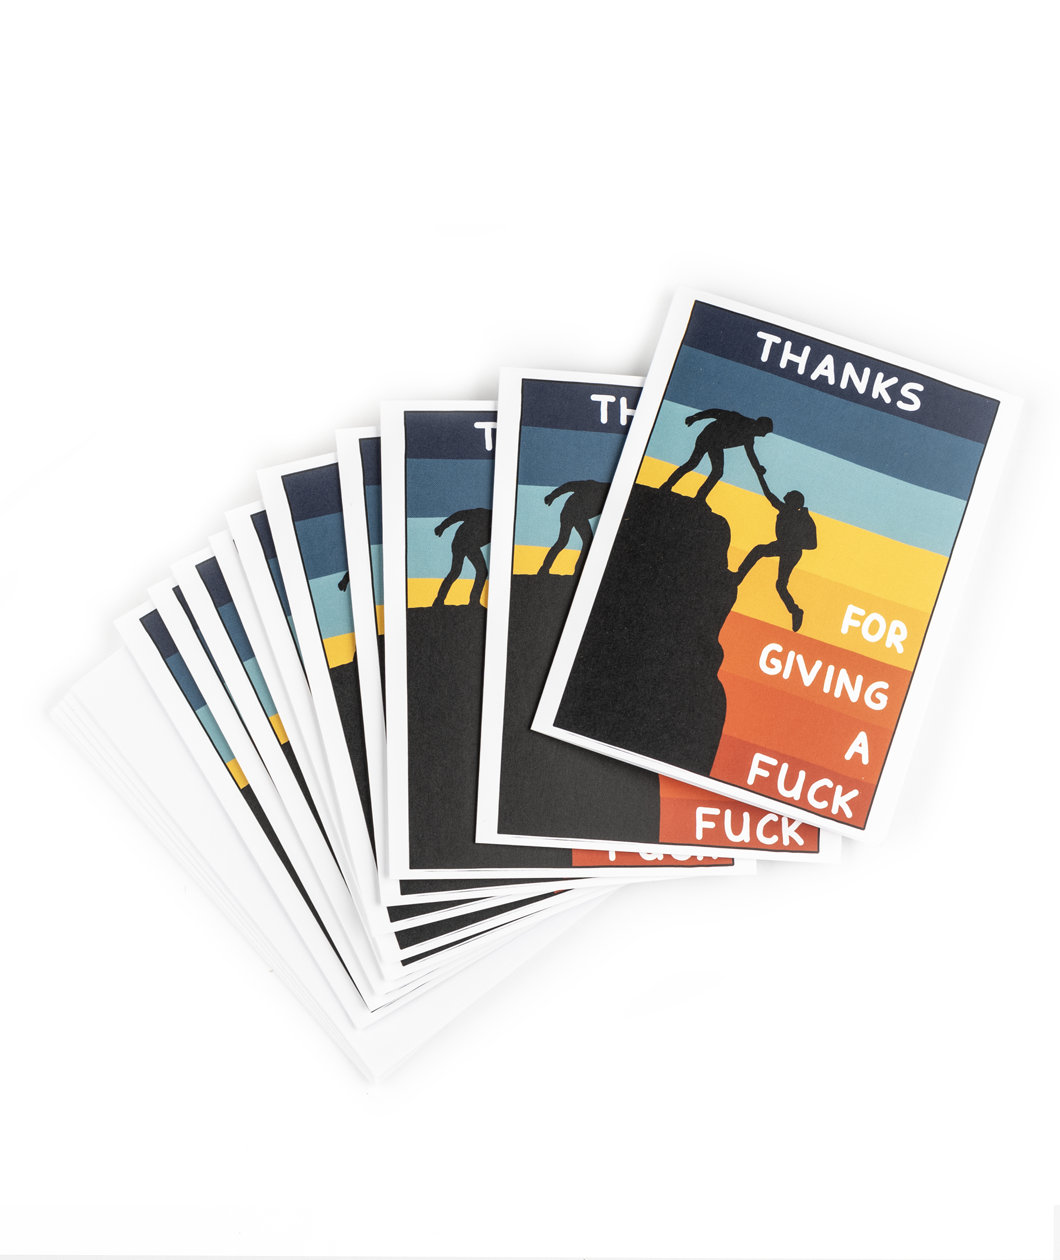 A set of 10 cards laid out that show a gradient from blue to orange in the background with the silhouette of a person helping another person climb up a cliff. The text reads "Thanks for giving a fuck". From Semi Rad.of 